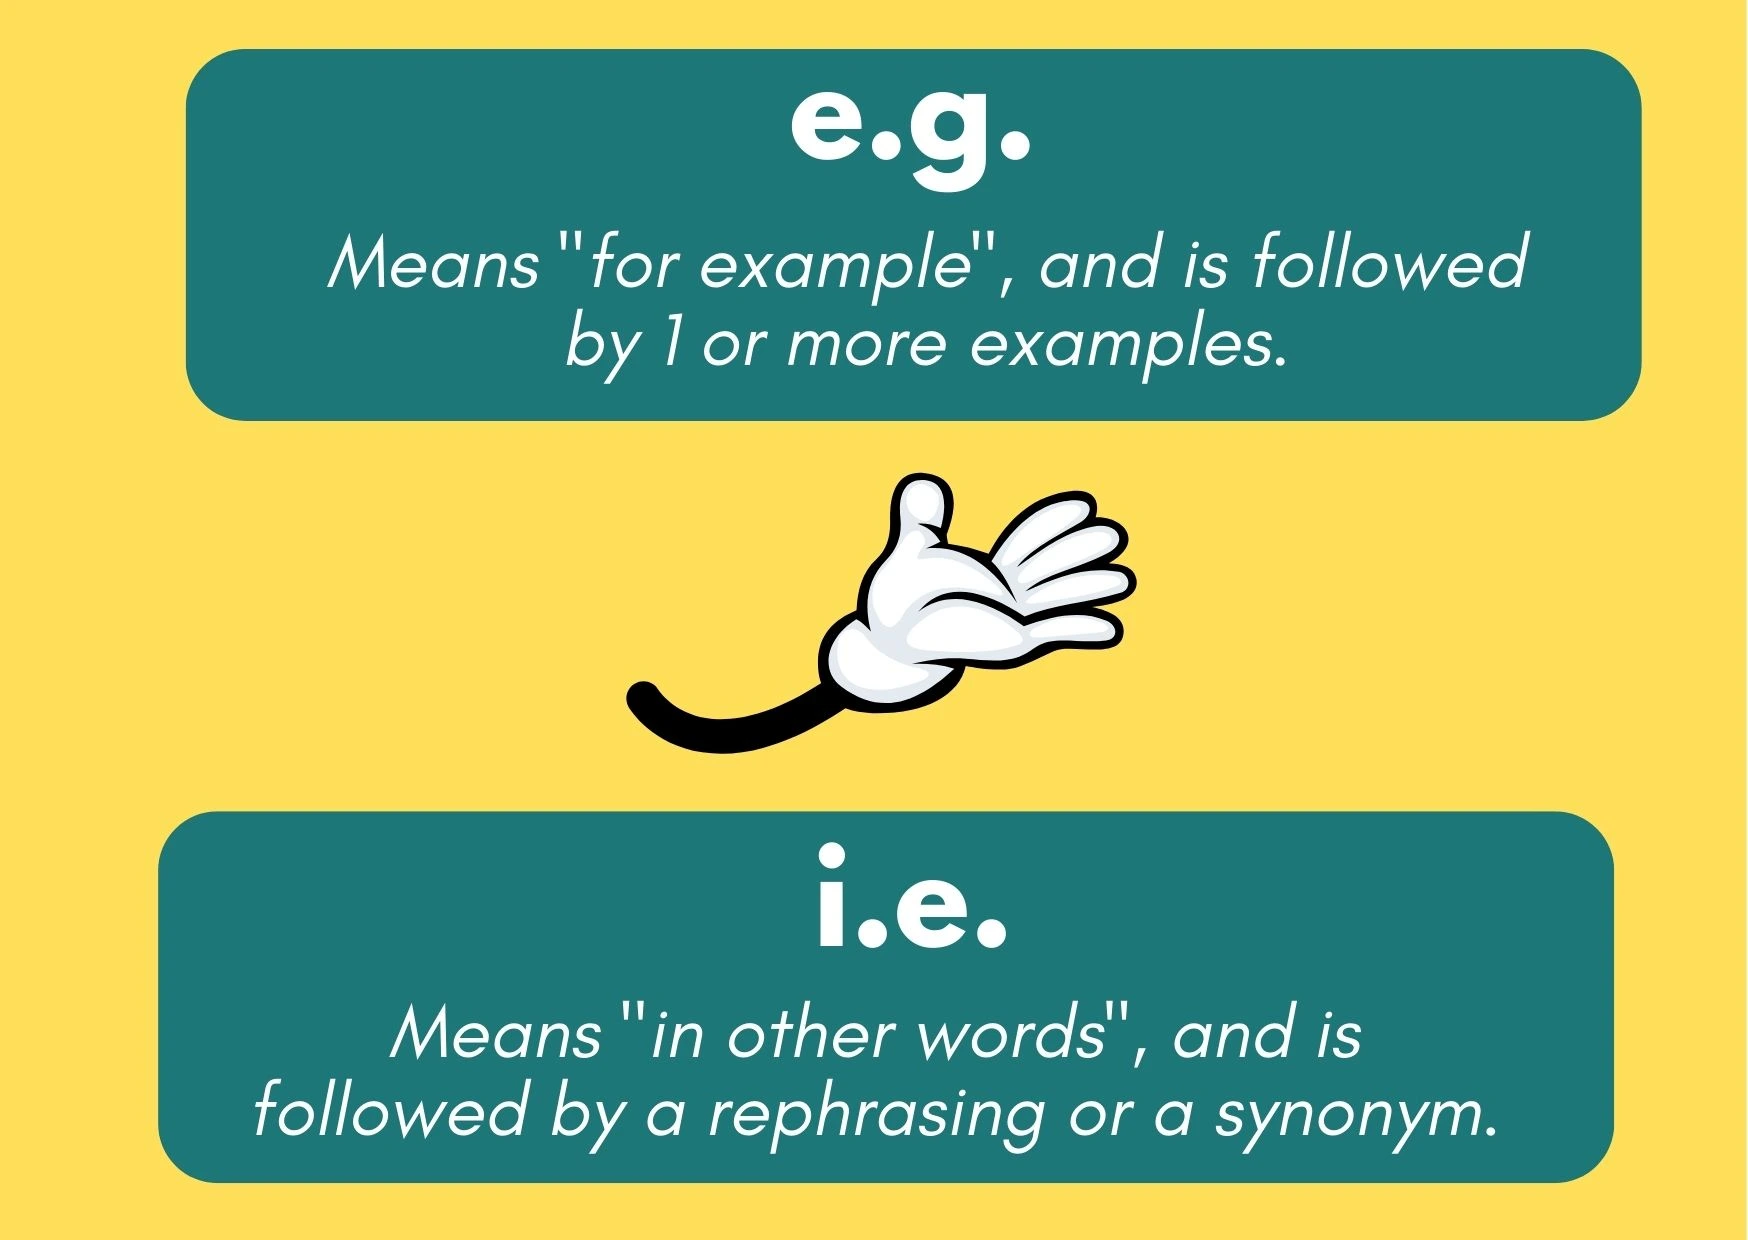 Graphic showing that e.g. means an example will follow, while i.e. means that a rephrasing or synonym will follow.